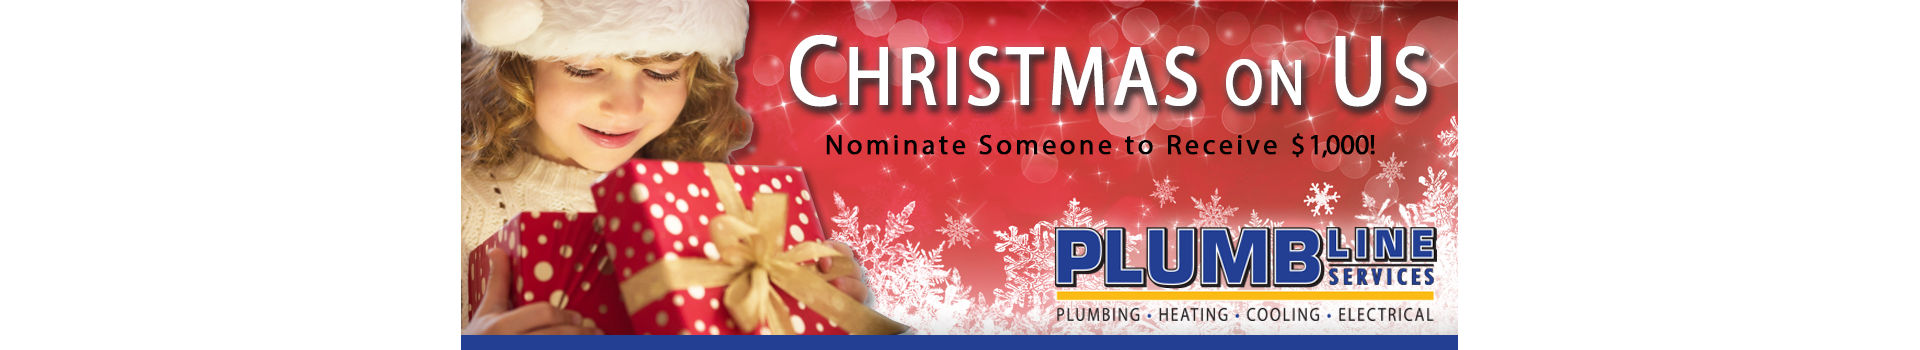 Christmas on us - Nominate someone to receive $1,000